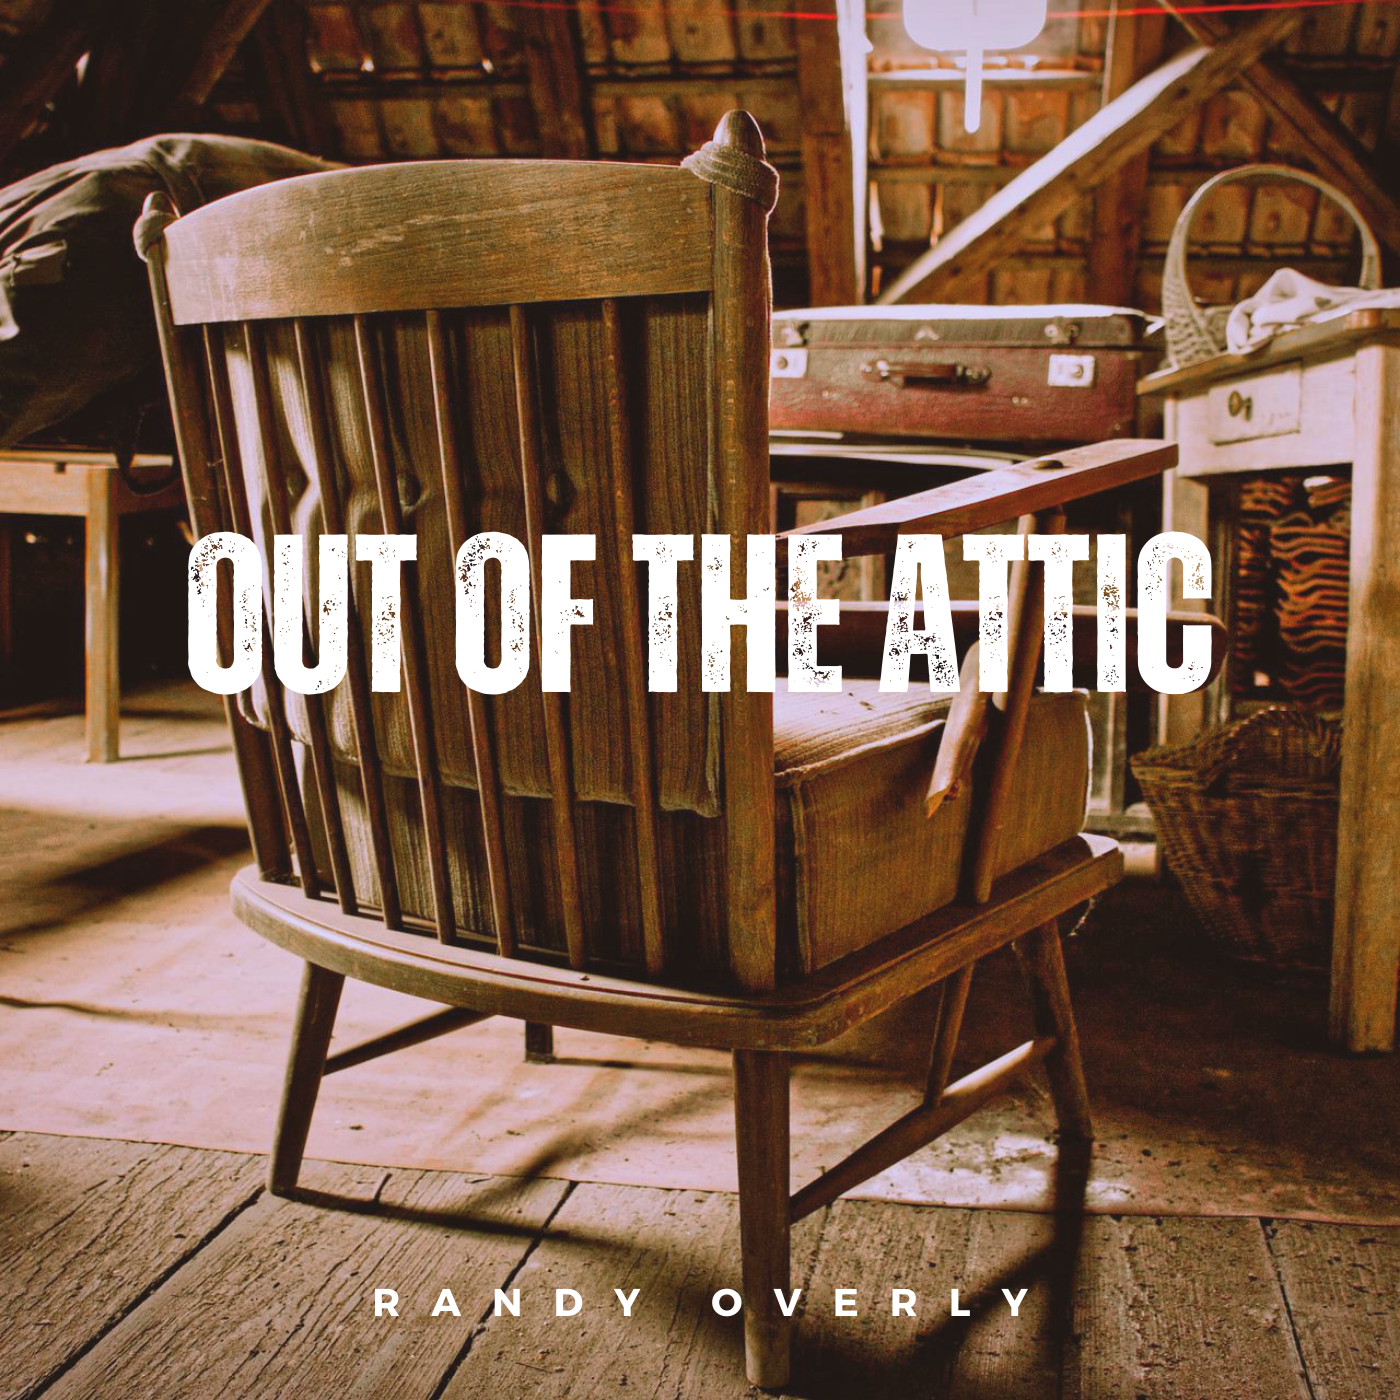 Out Of The Attic - CD album cover